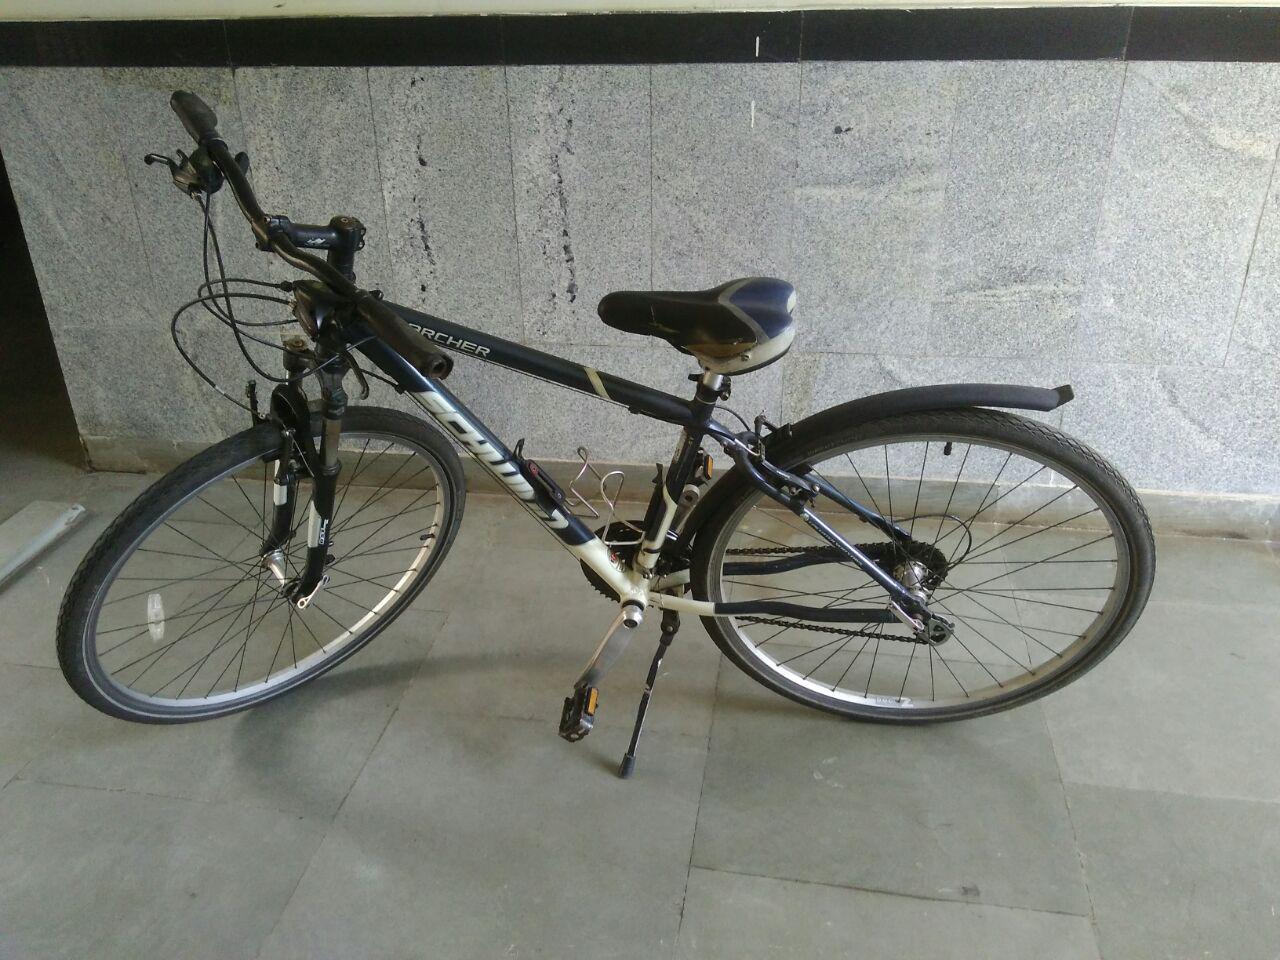 My cycle pic